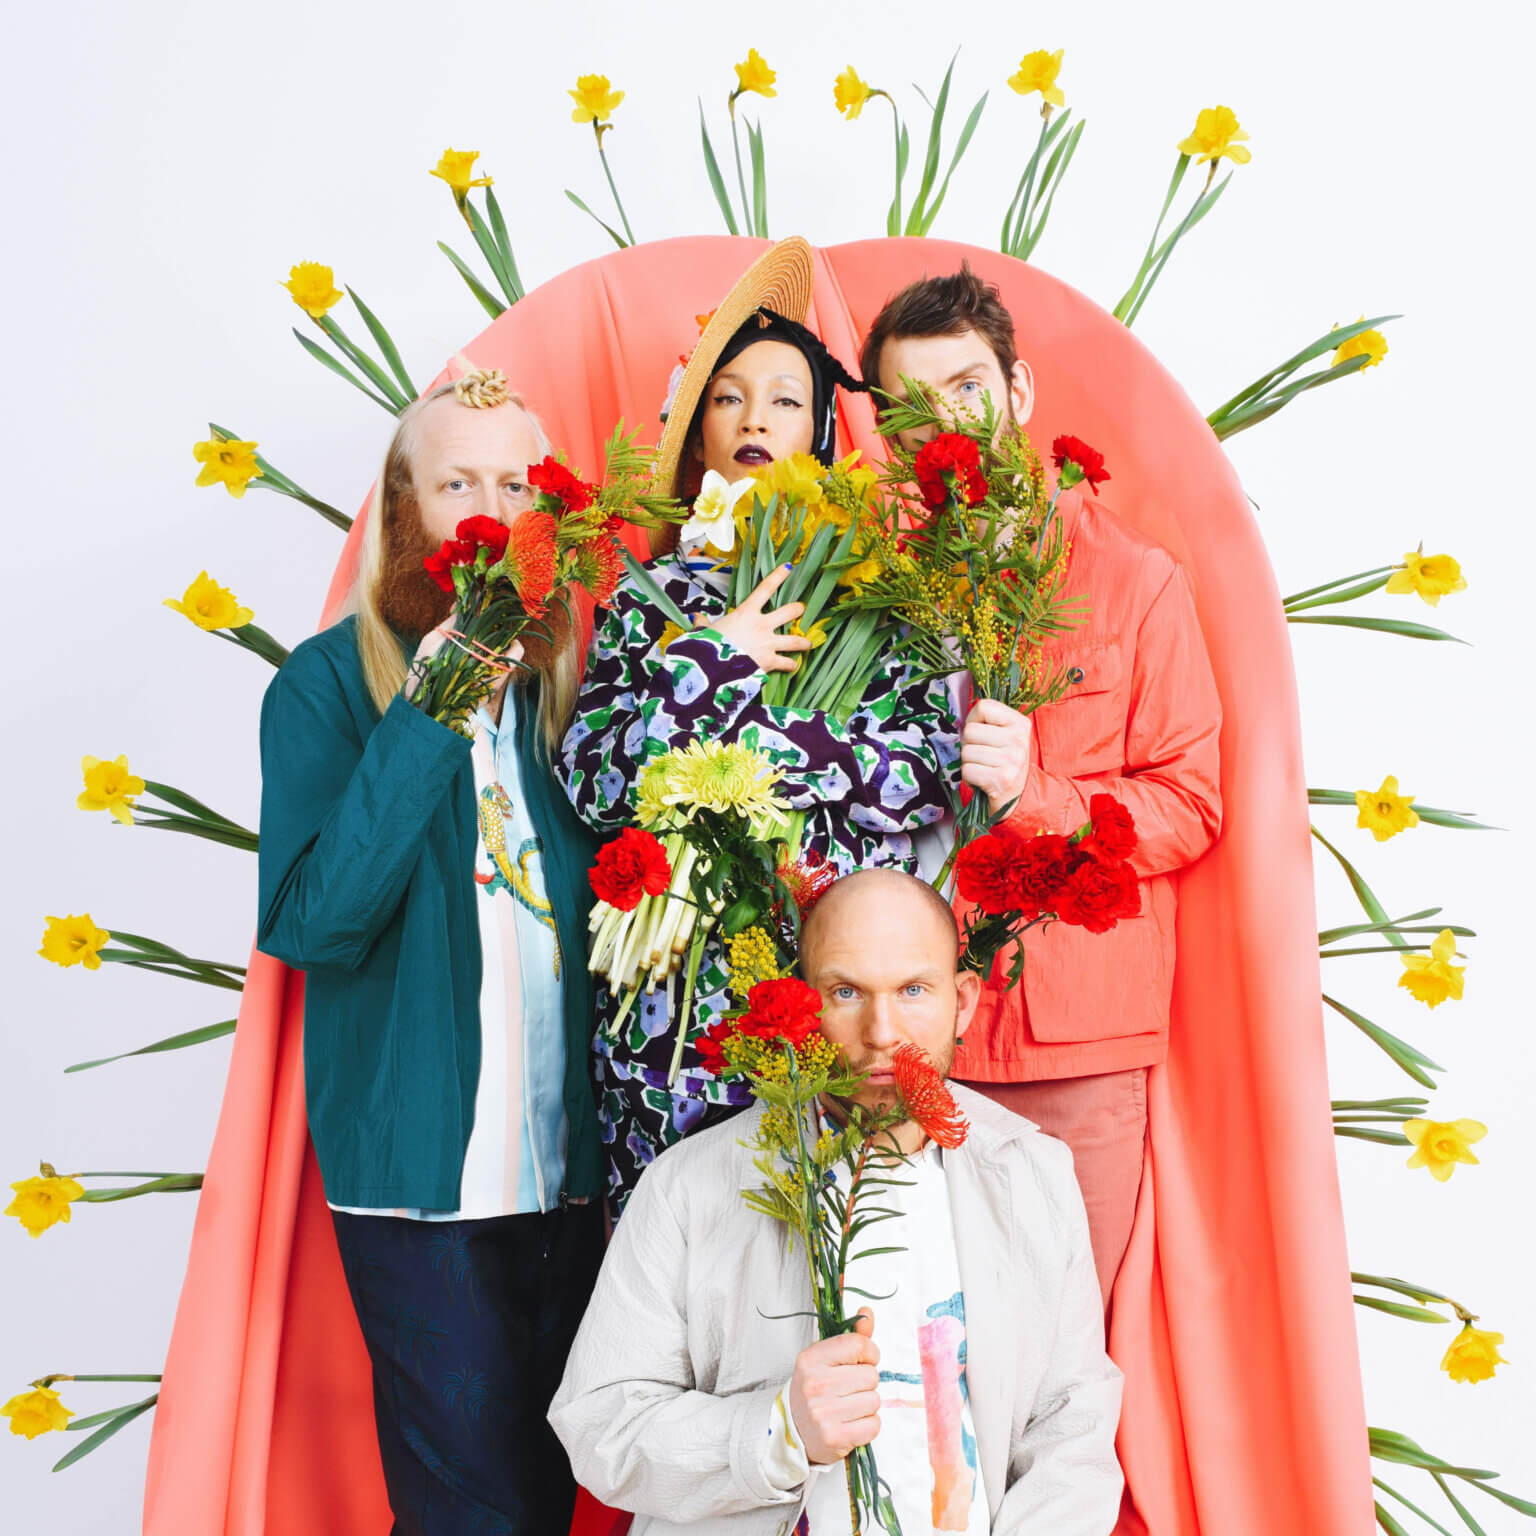 Little Dragon have released a surprise ep entitled Drifting Out. The album is out today via Ninja Tune and Streaming services